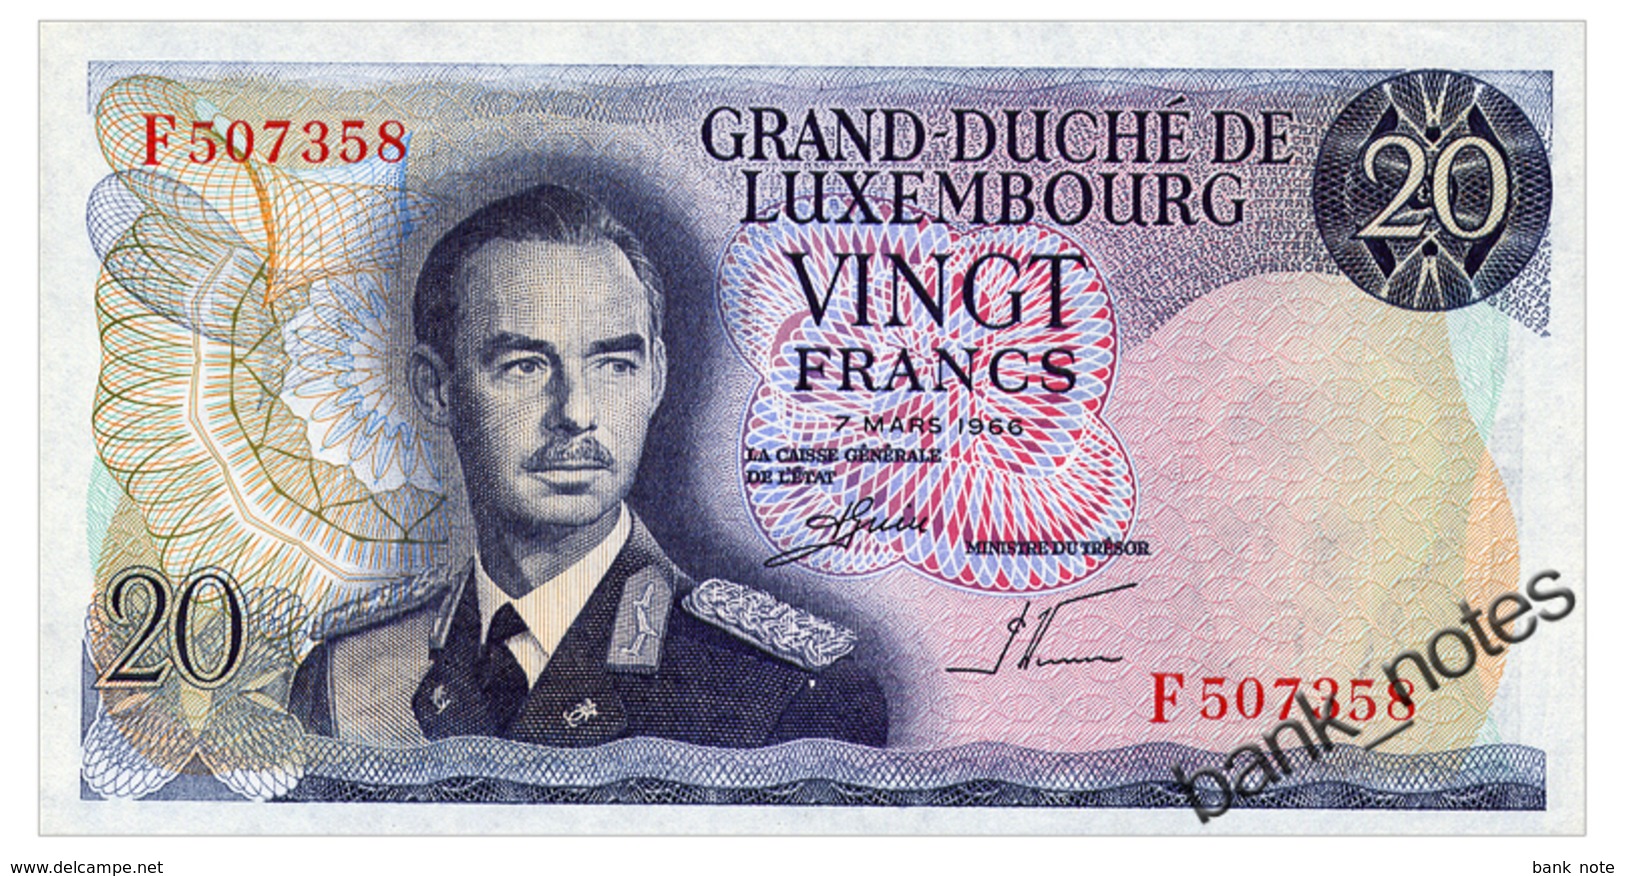 LUXEMBOURG 20 FRANCS 1966 Pick 54 Unc - Luxembourg